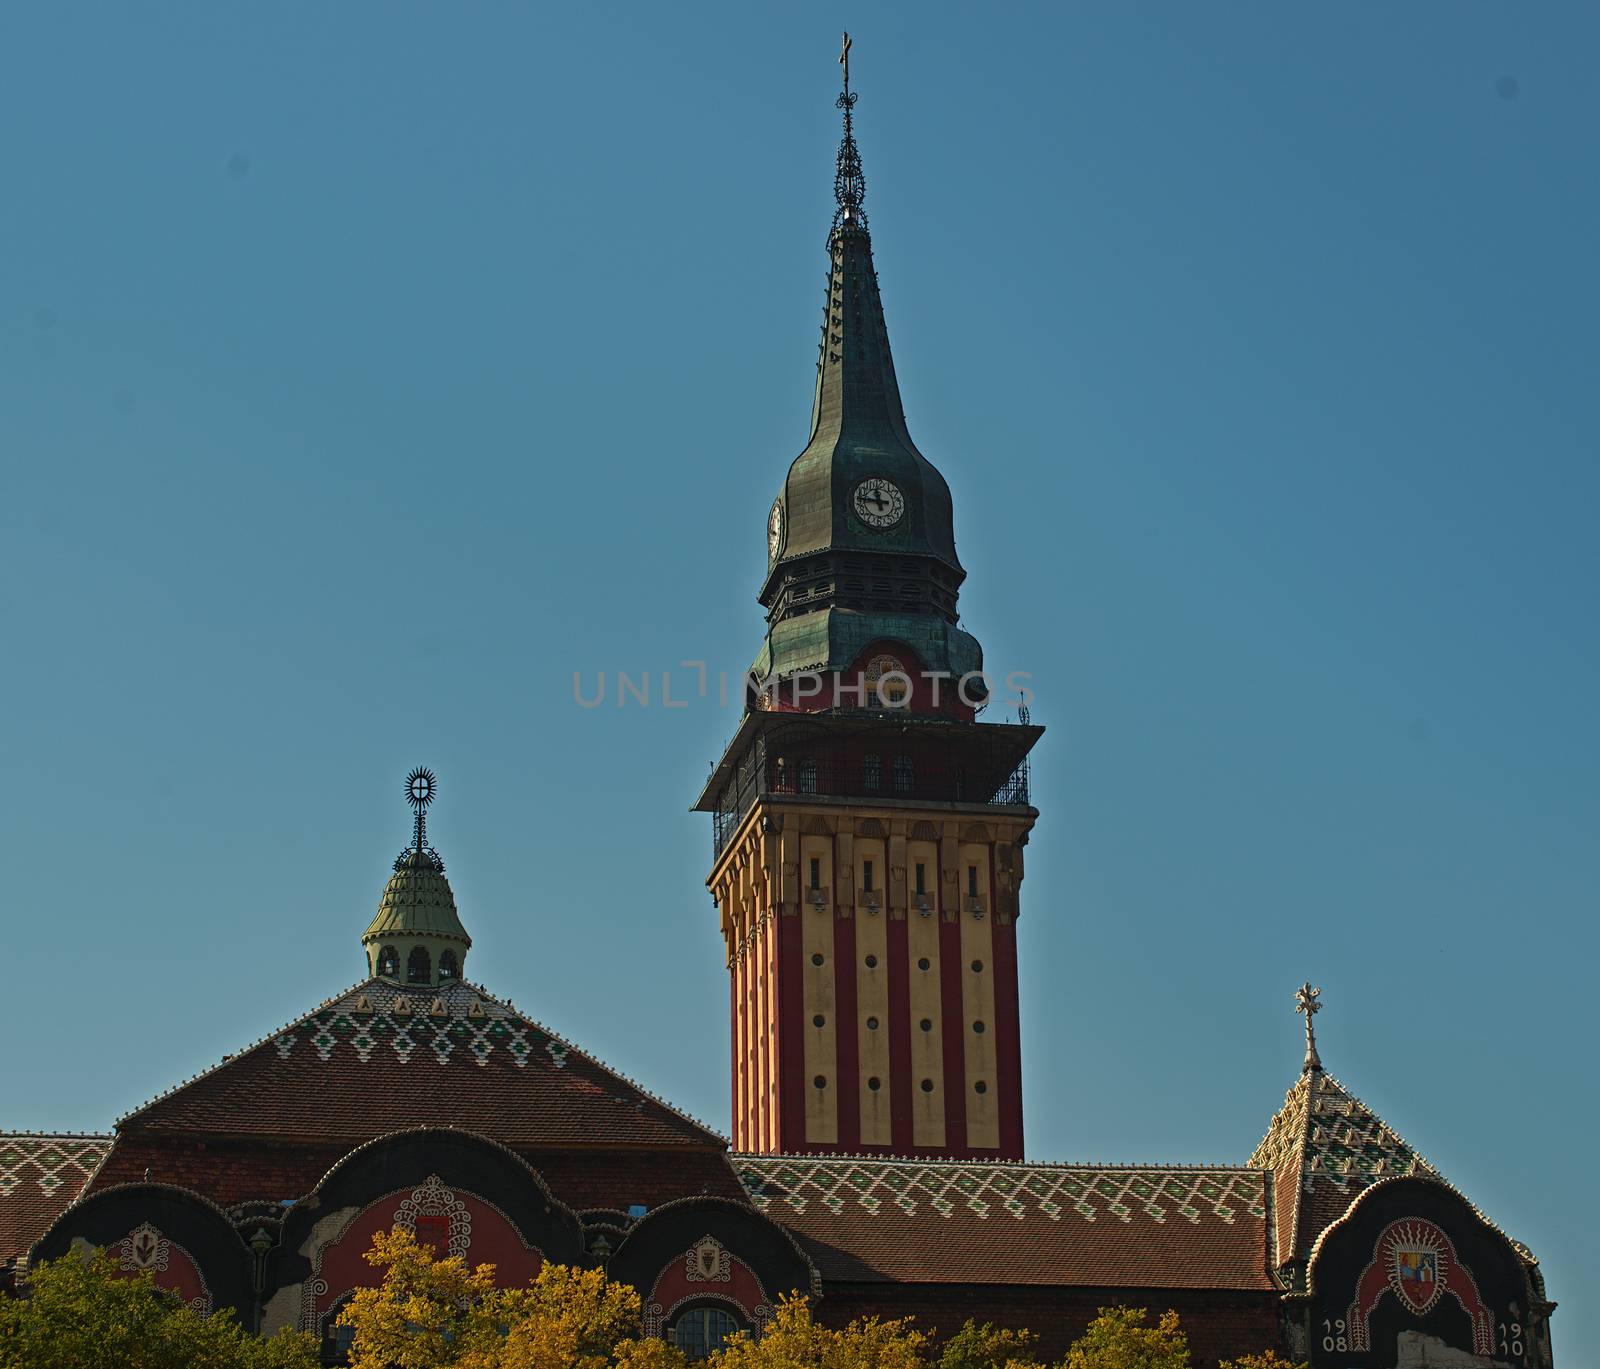 Decorated Top of the catholic church in Subotica, Serbia by sheriffkule